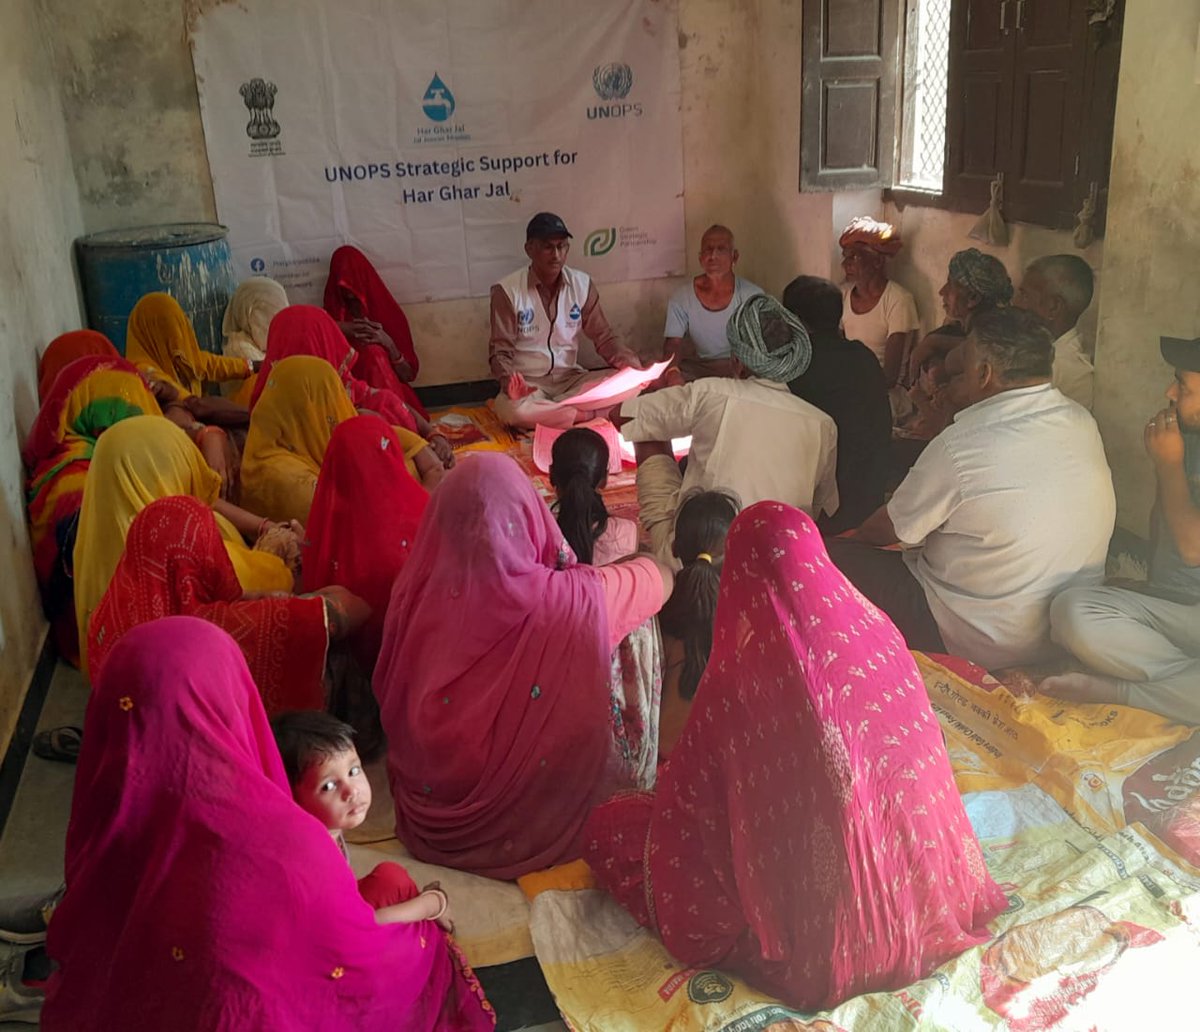 'Empowering communities through knowledge! VWSC members from Chandano ki Bhagal & Gram Kanwlai villages in Rajasthan came together for intensive training on bookkeeping essentials. @DenmarkinIndia @UNOPS @jaljeevan_ @UNinIndia